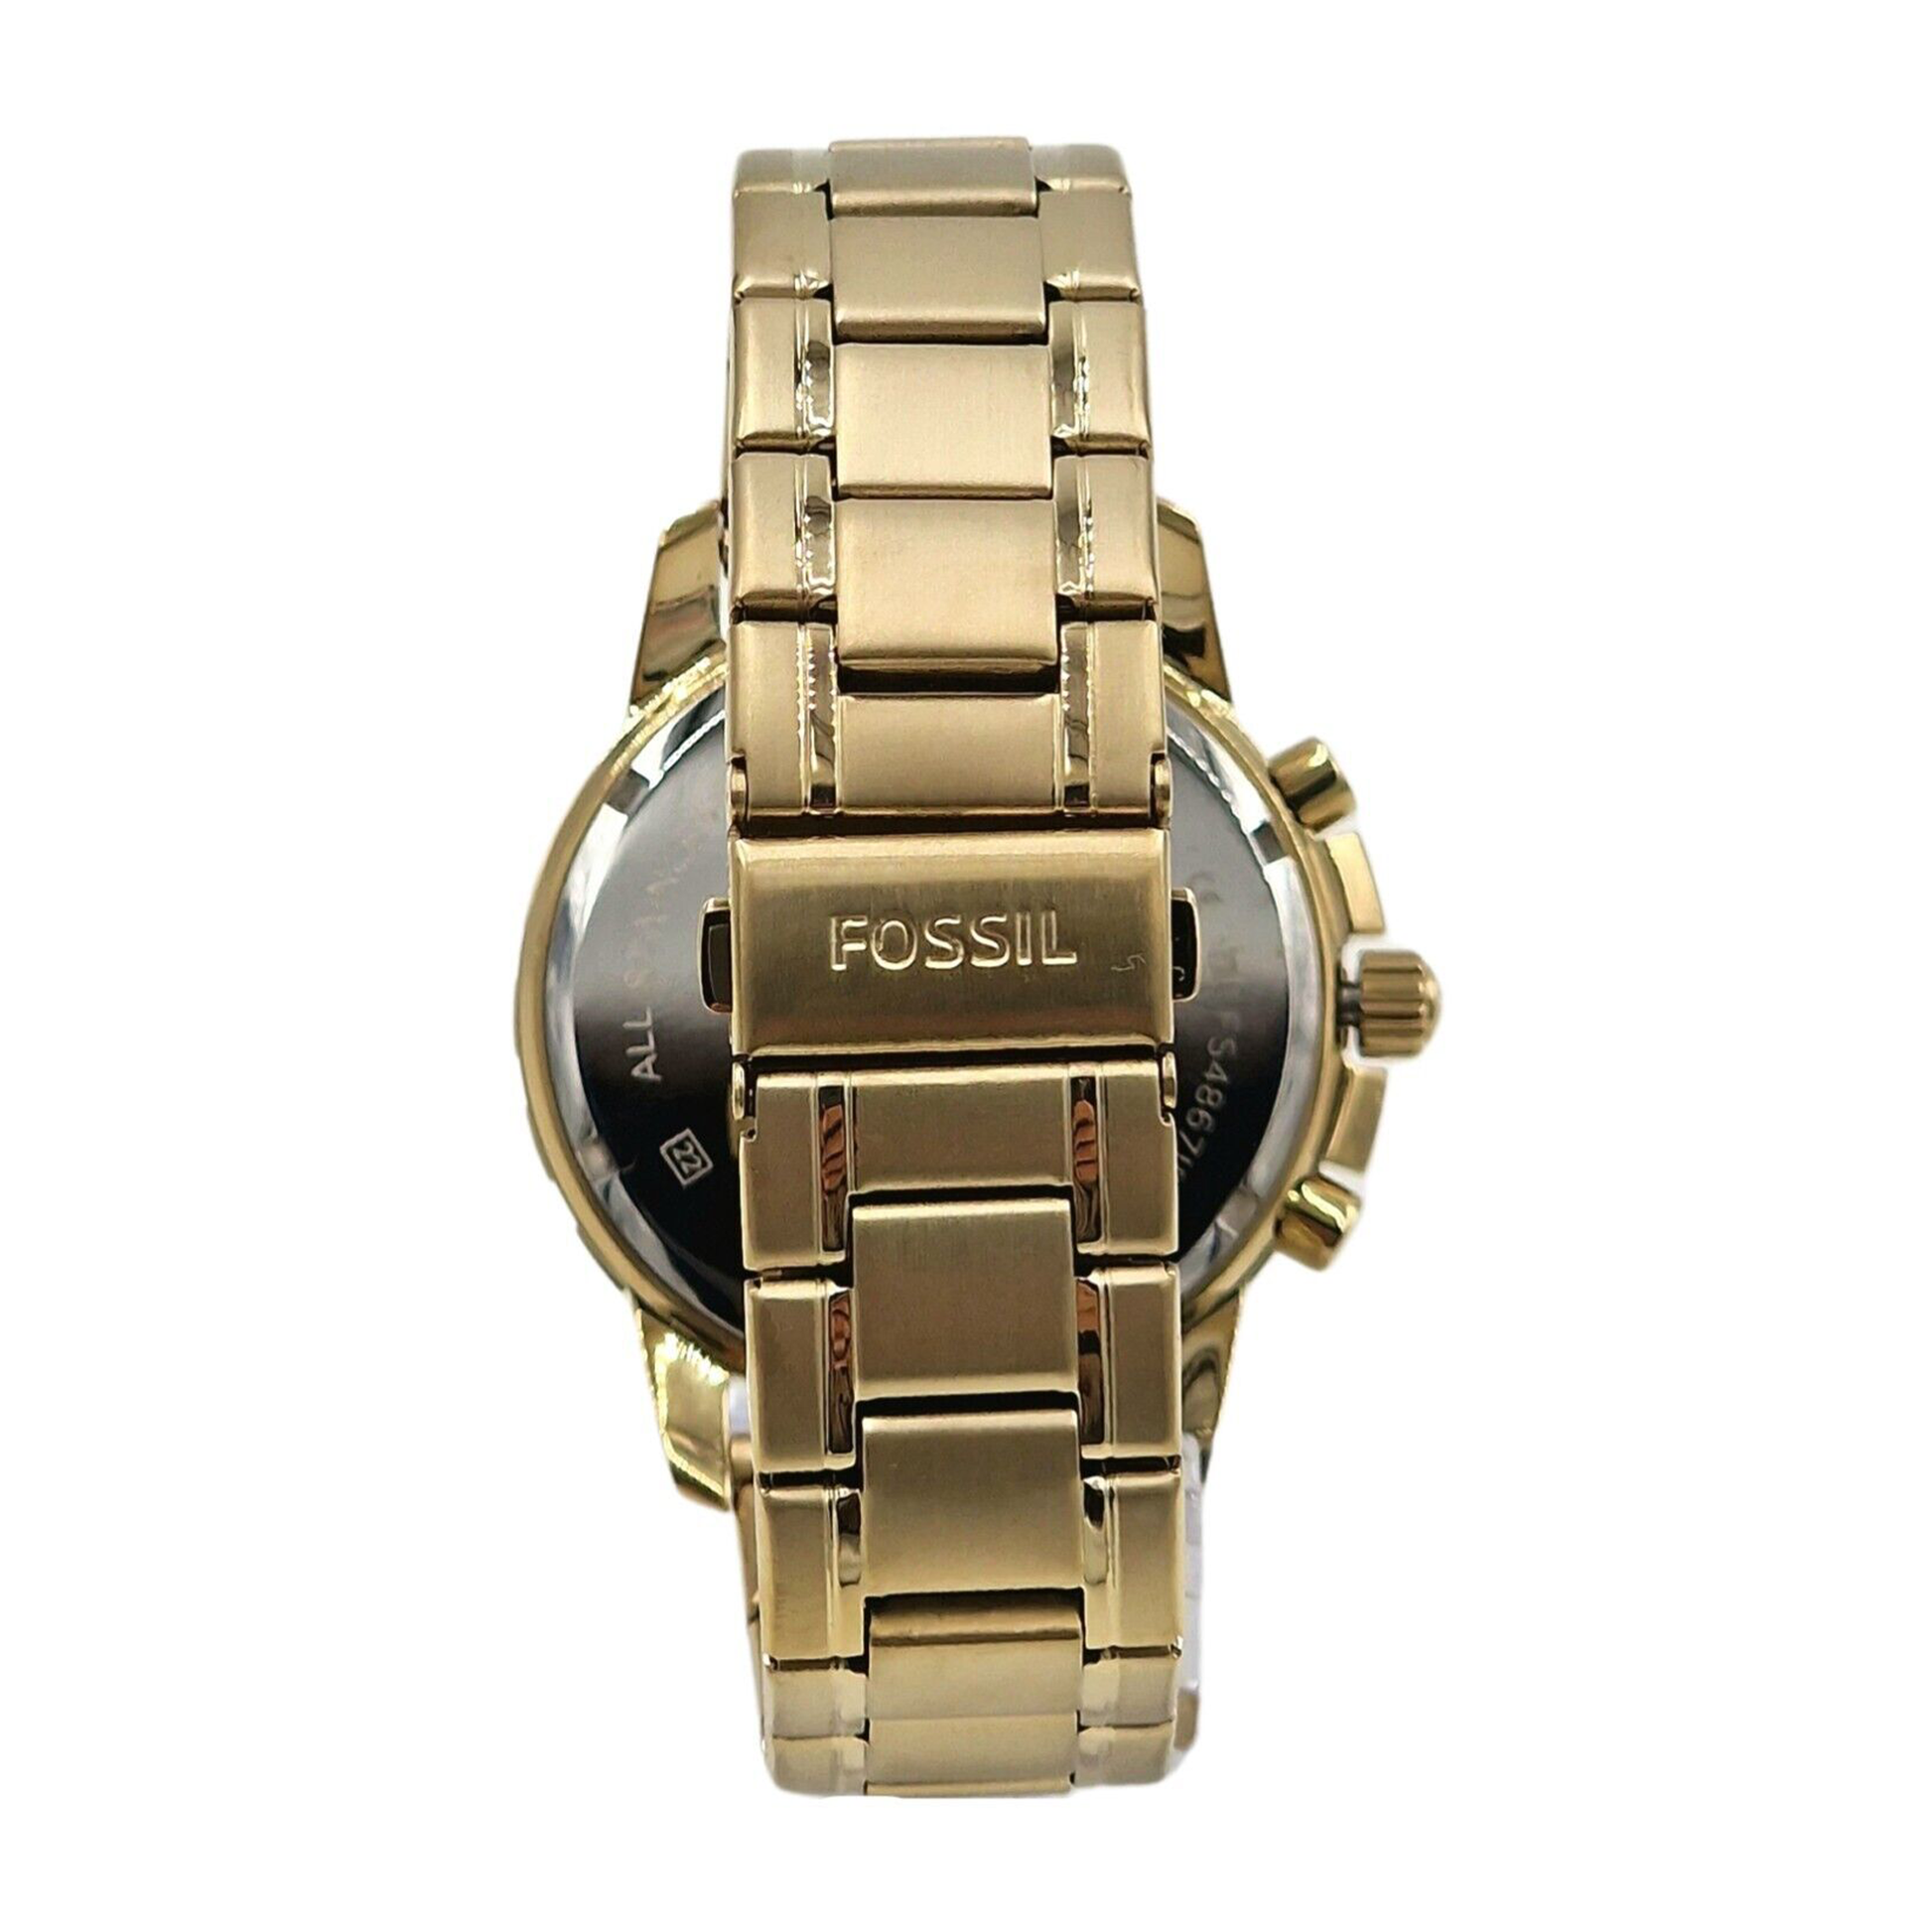 Fossil Men's Dean Chronograph Gold-Tone Stainless Steel Watch - FS4867IE - 796483492998 